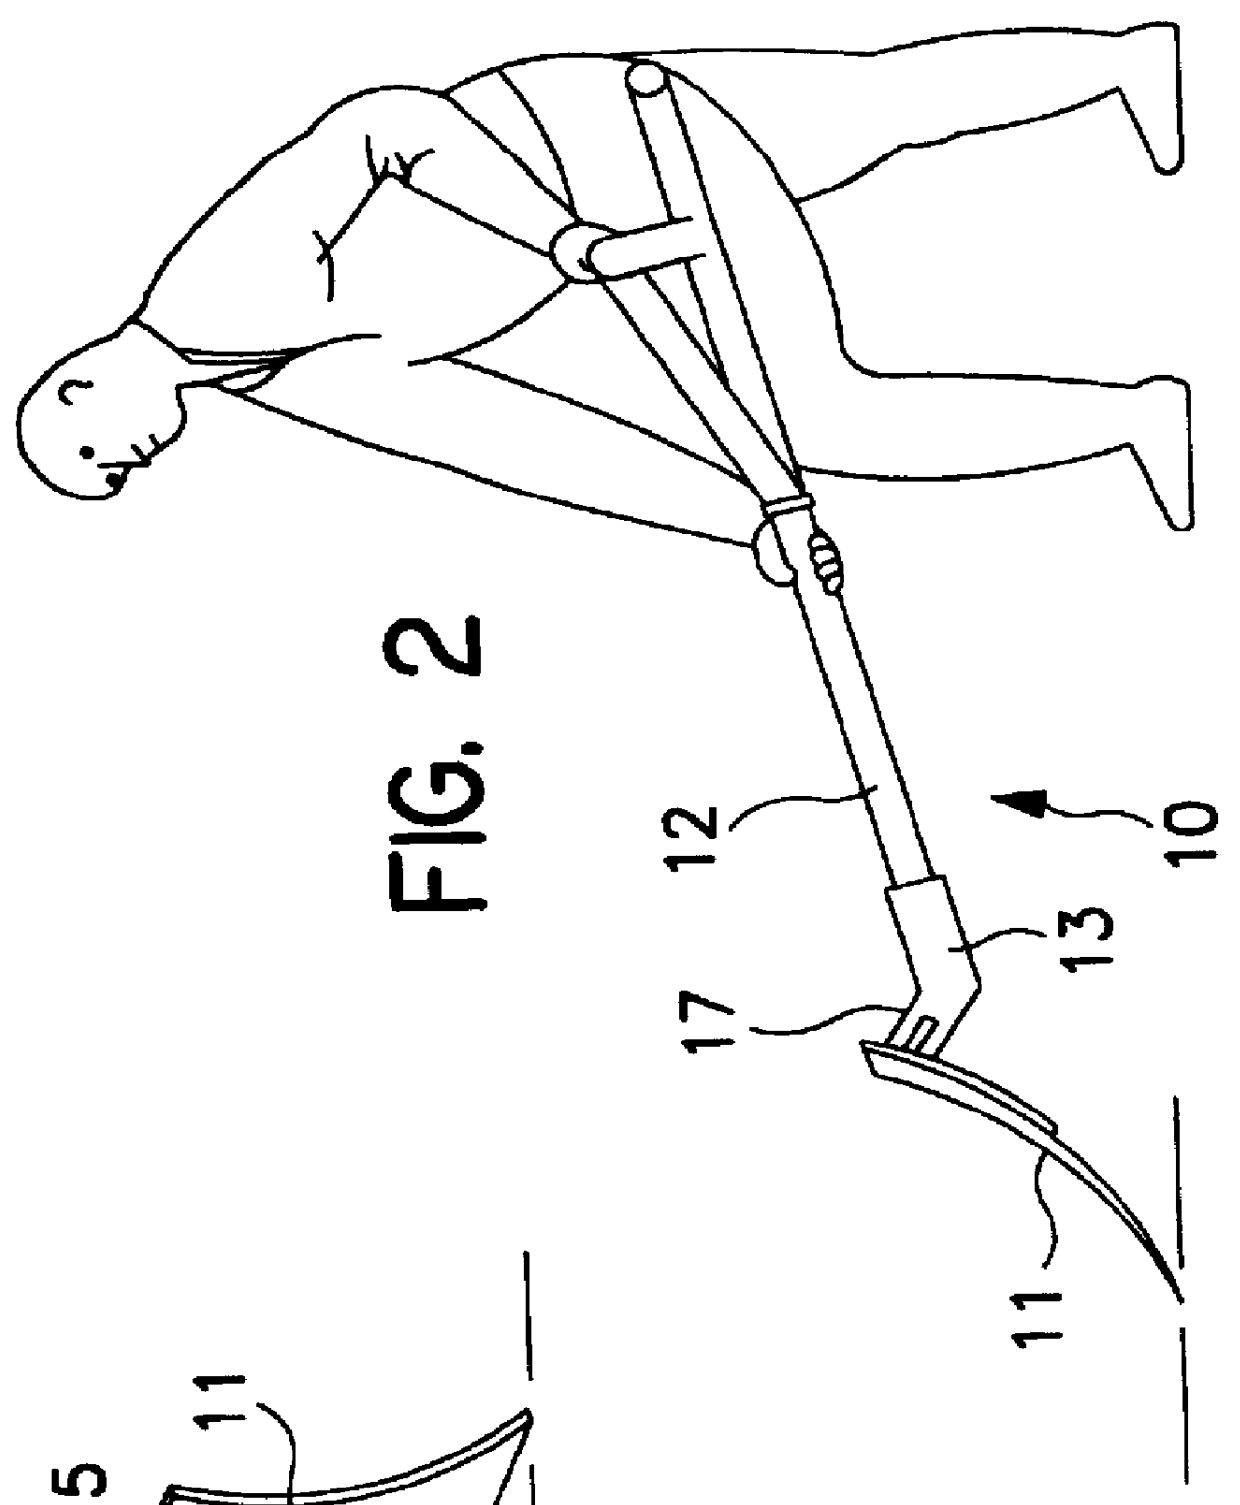 Manually-operable combination shovel and plow for snow and other material